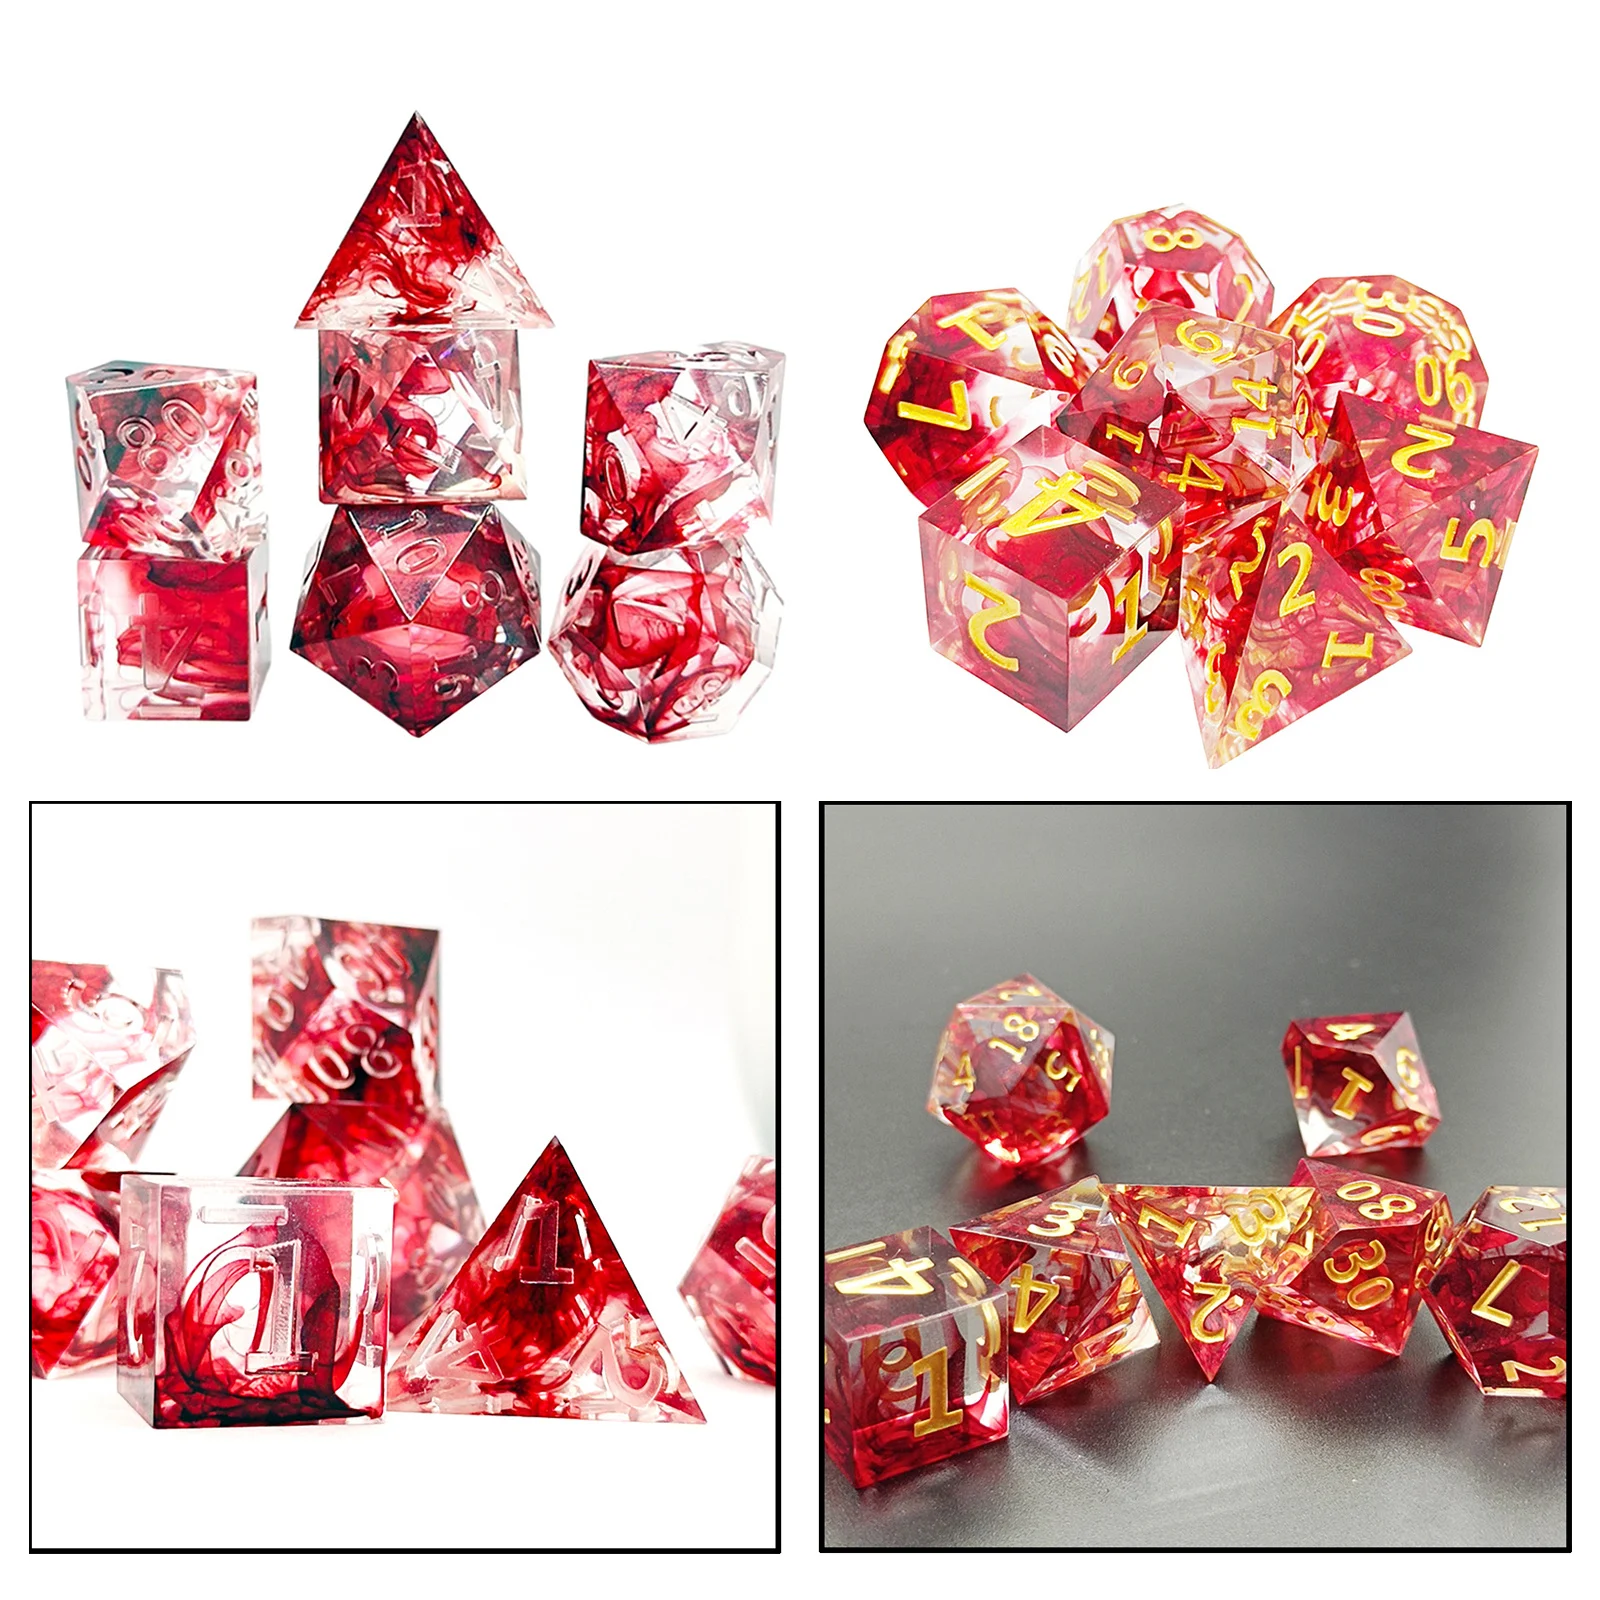 Set of 7 Polyhedral Dice Crystal RPG Role Playing Dice Blood Effect Acute Angle Dice Sets for Shadow Run RPG Dices